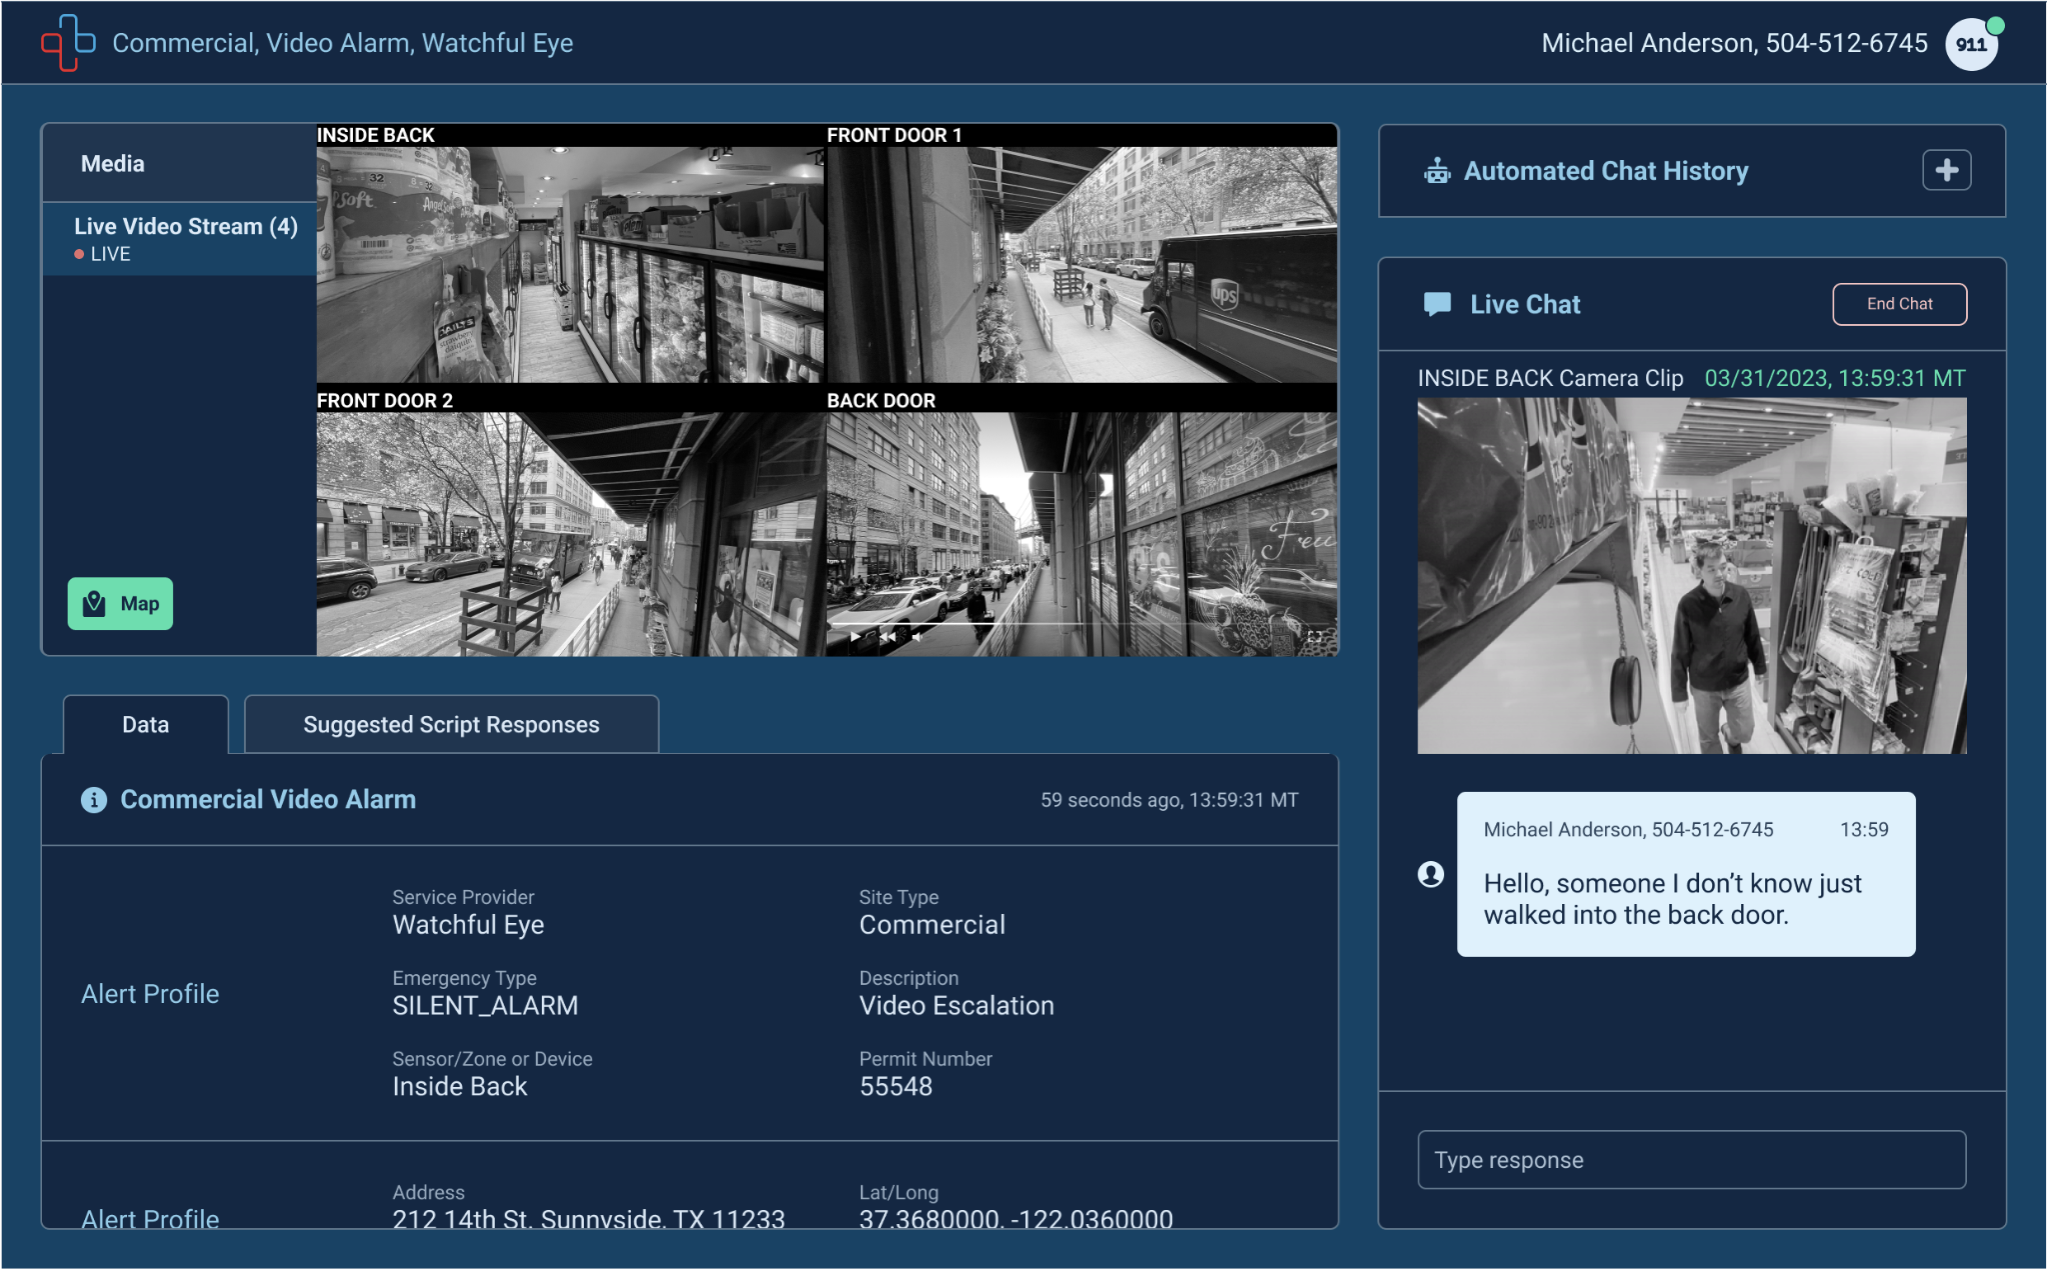 RapidSOS dashboard with the title “Commercial, video alarm, watchful eye” in the top left, and contact details for a person in the top right. Multiple surveillance camera videos shown. In the bottom left there’s a list with data points for the specific video alarm. In the right hand panel is a view of a live chat.